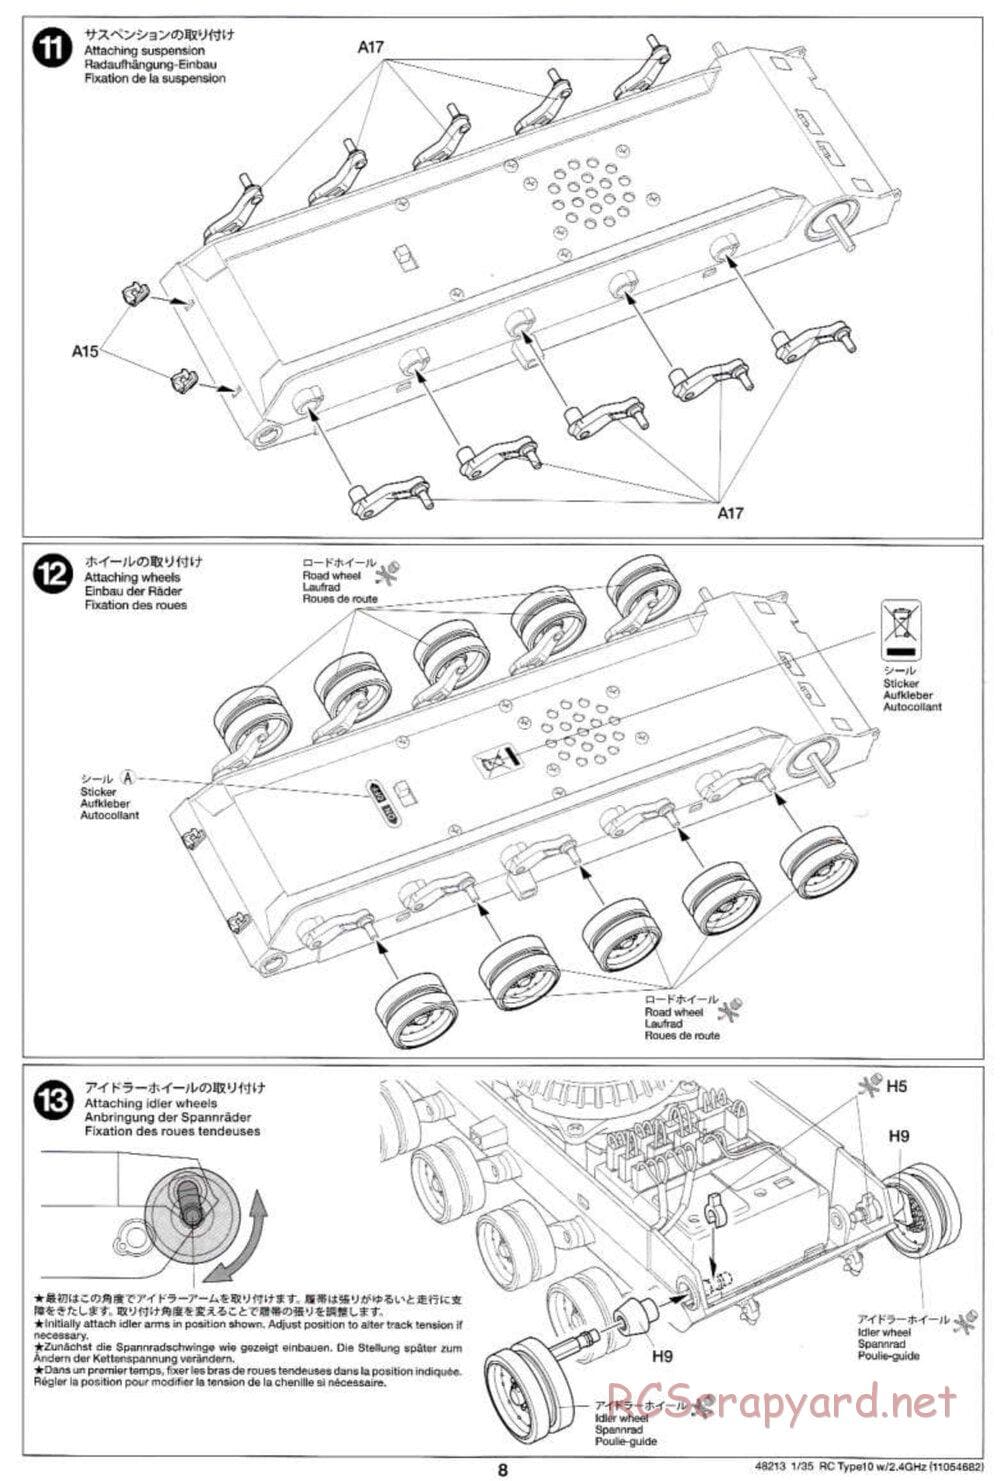 Tamiya - JGSDF Type 10 Tank - 1/35 Scale Chassis - Manual - Page 8